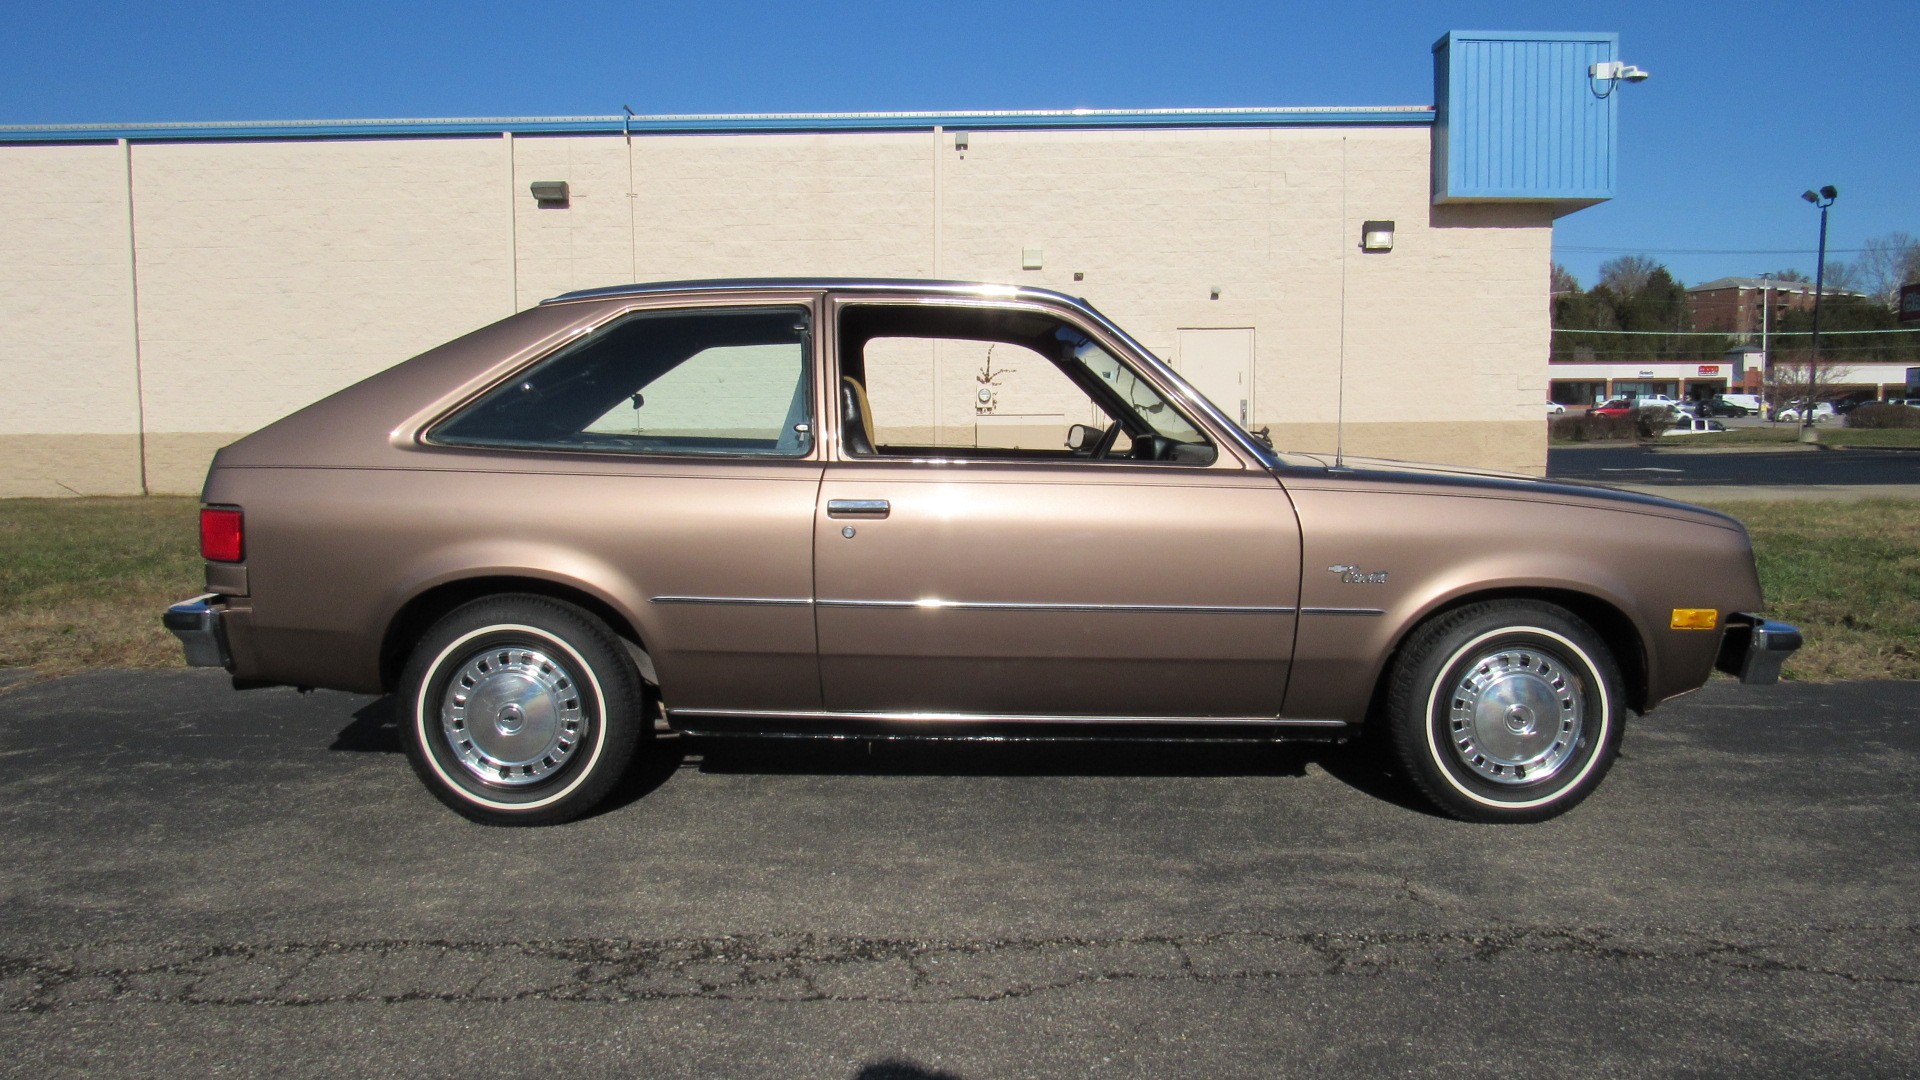 1980 Chevy Chevette, One Owner, 41K Miles, Mint, SOLD!